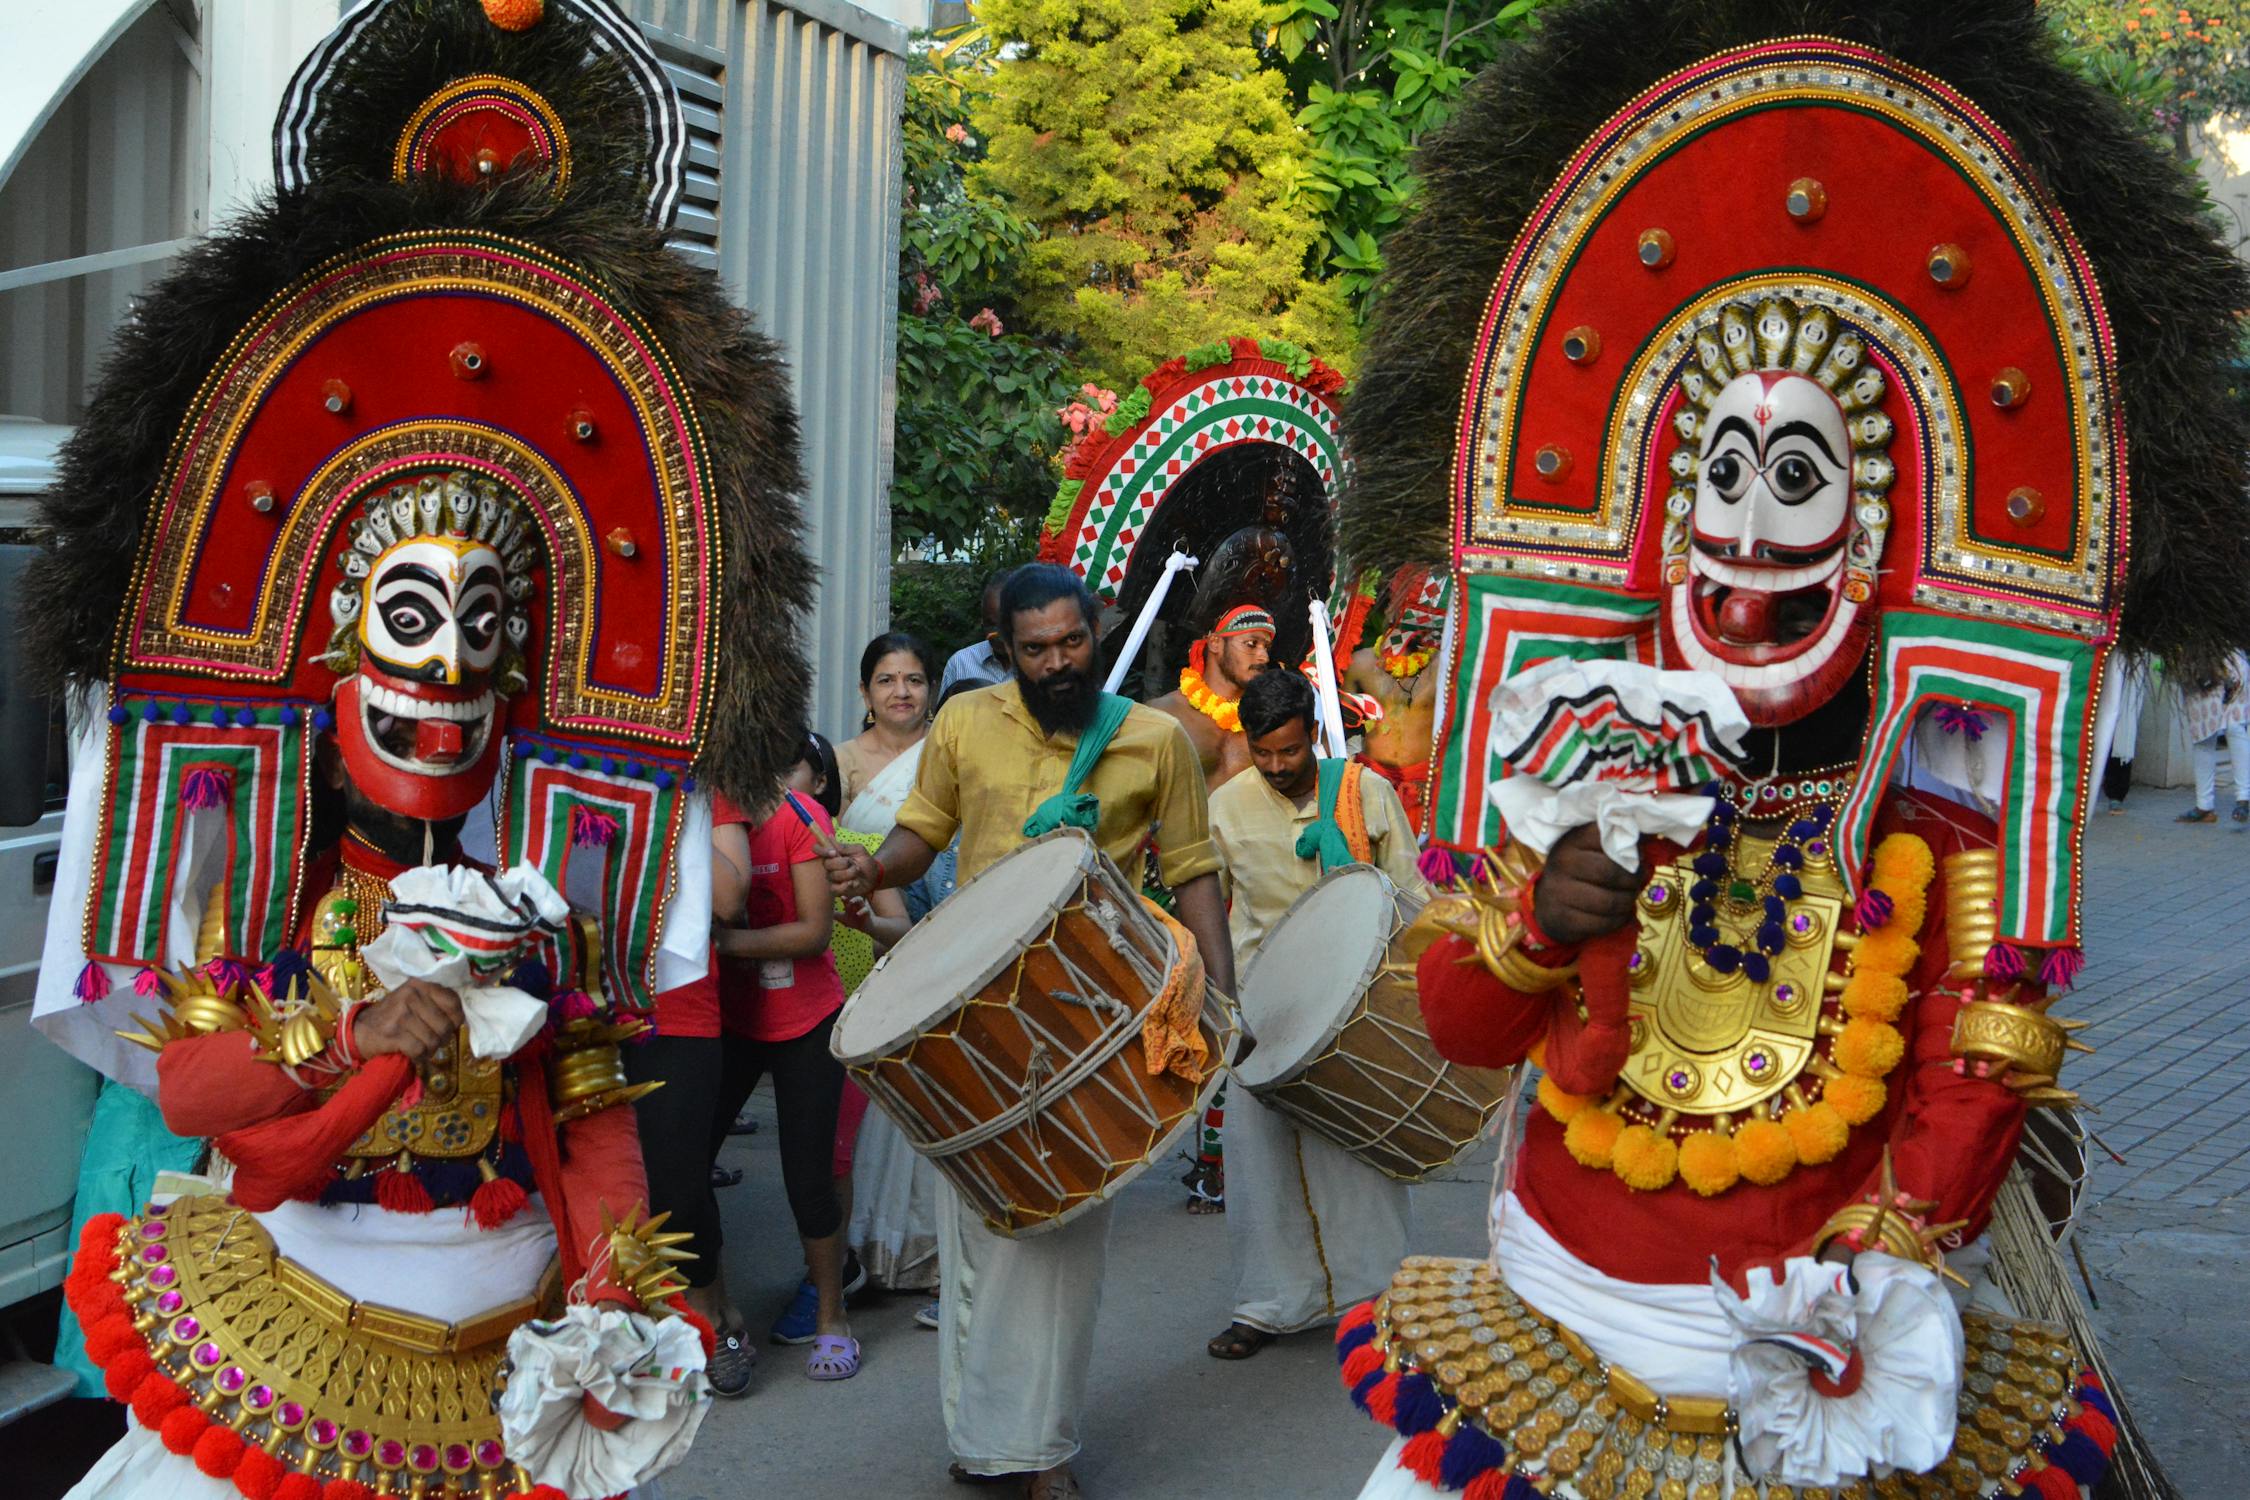 Traditional Folk Dancers in Thira Costumes during a Festival in Kerala, South India